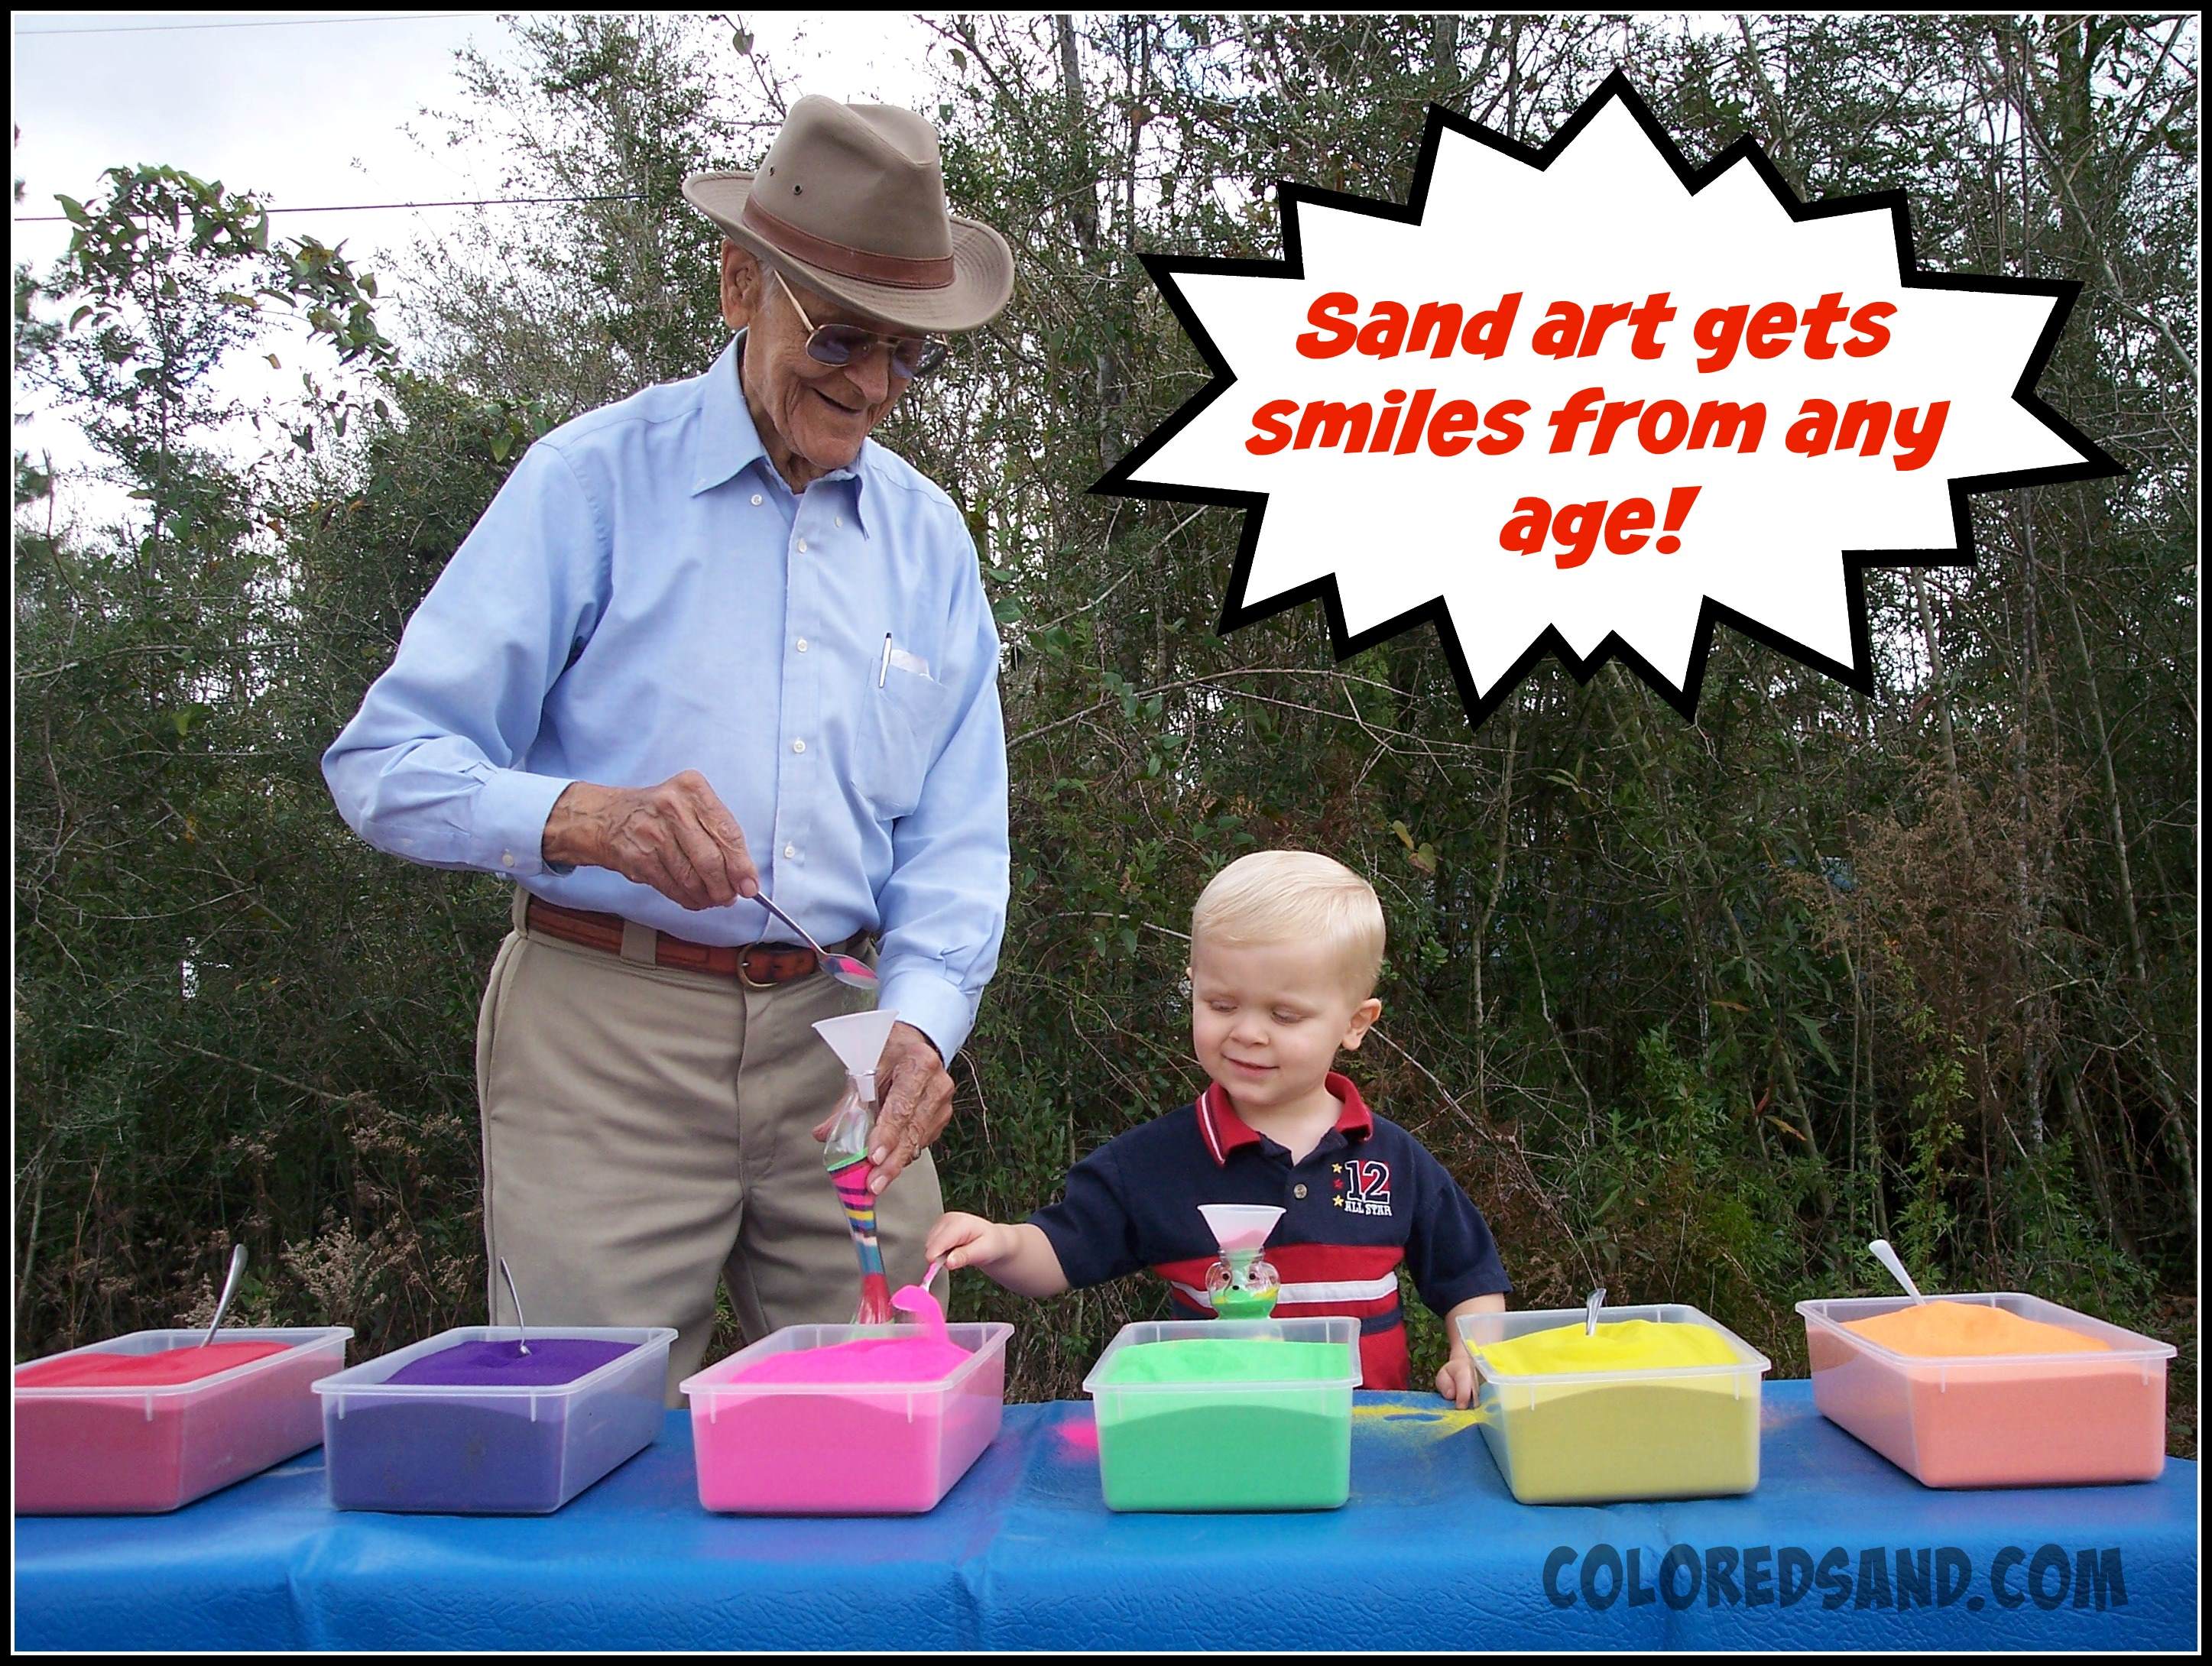 sand art is for the young and old